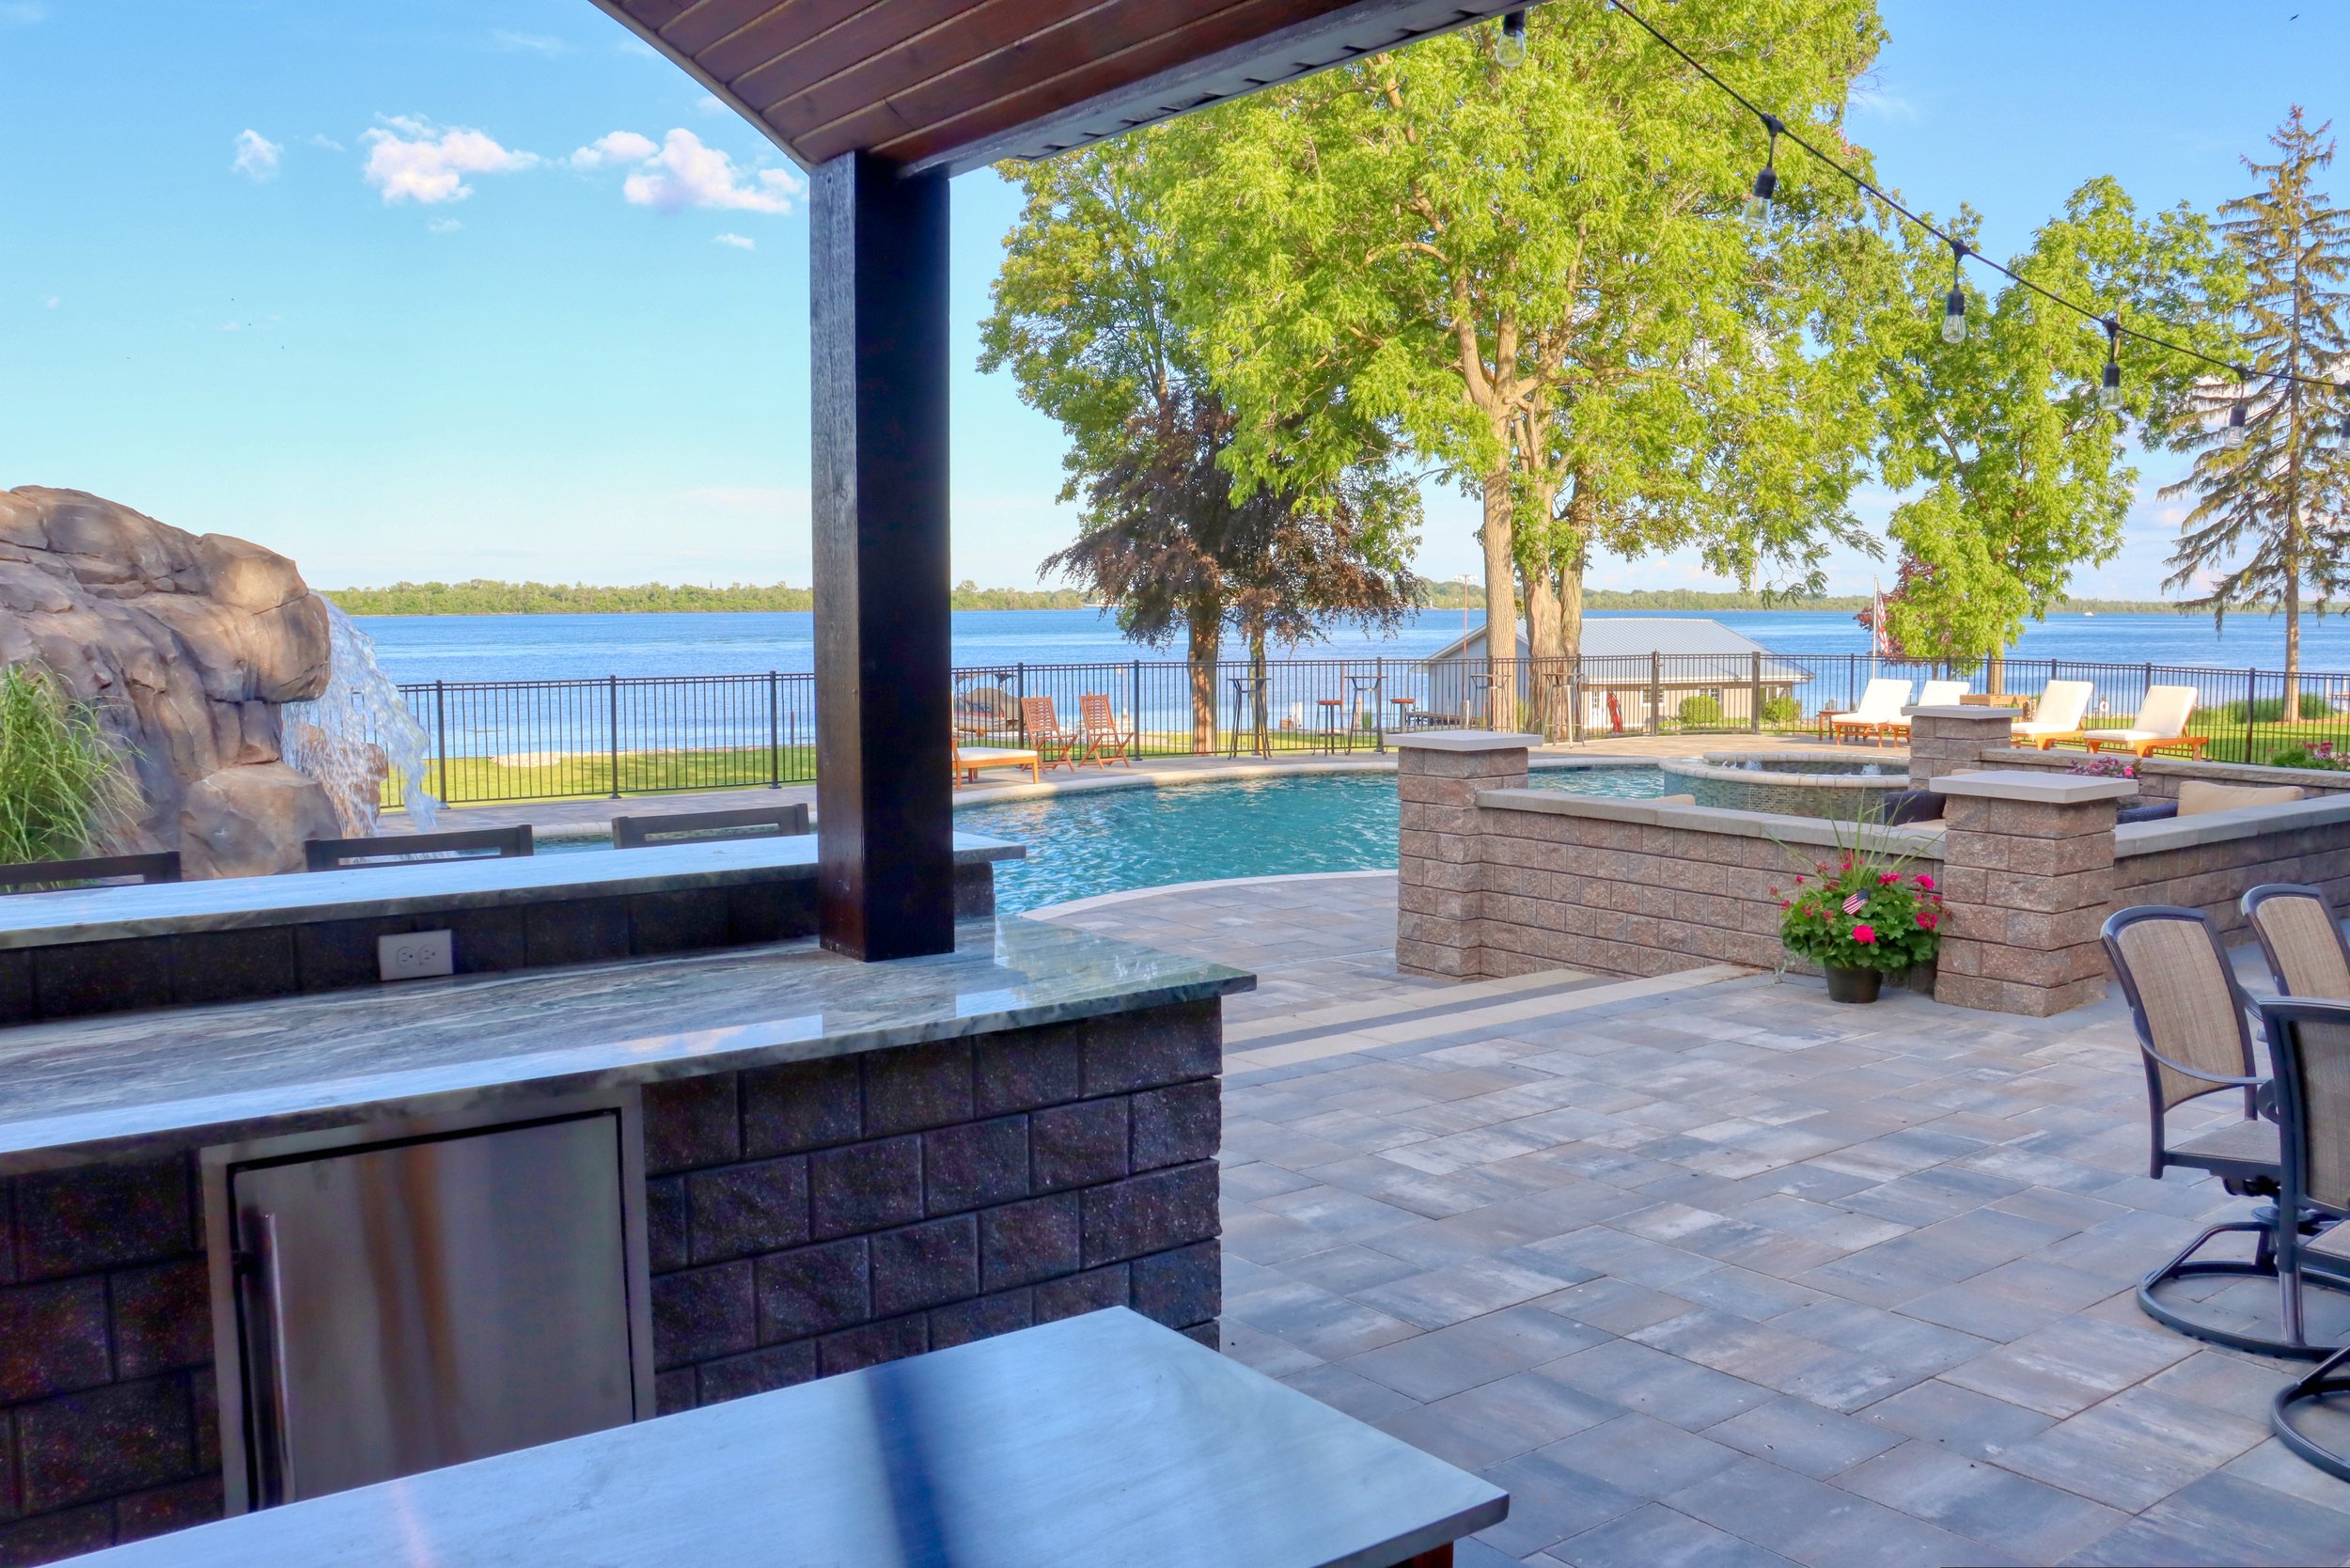 Patio pavers and outdoor kitchen in Orchard Lake, MI